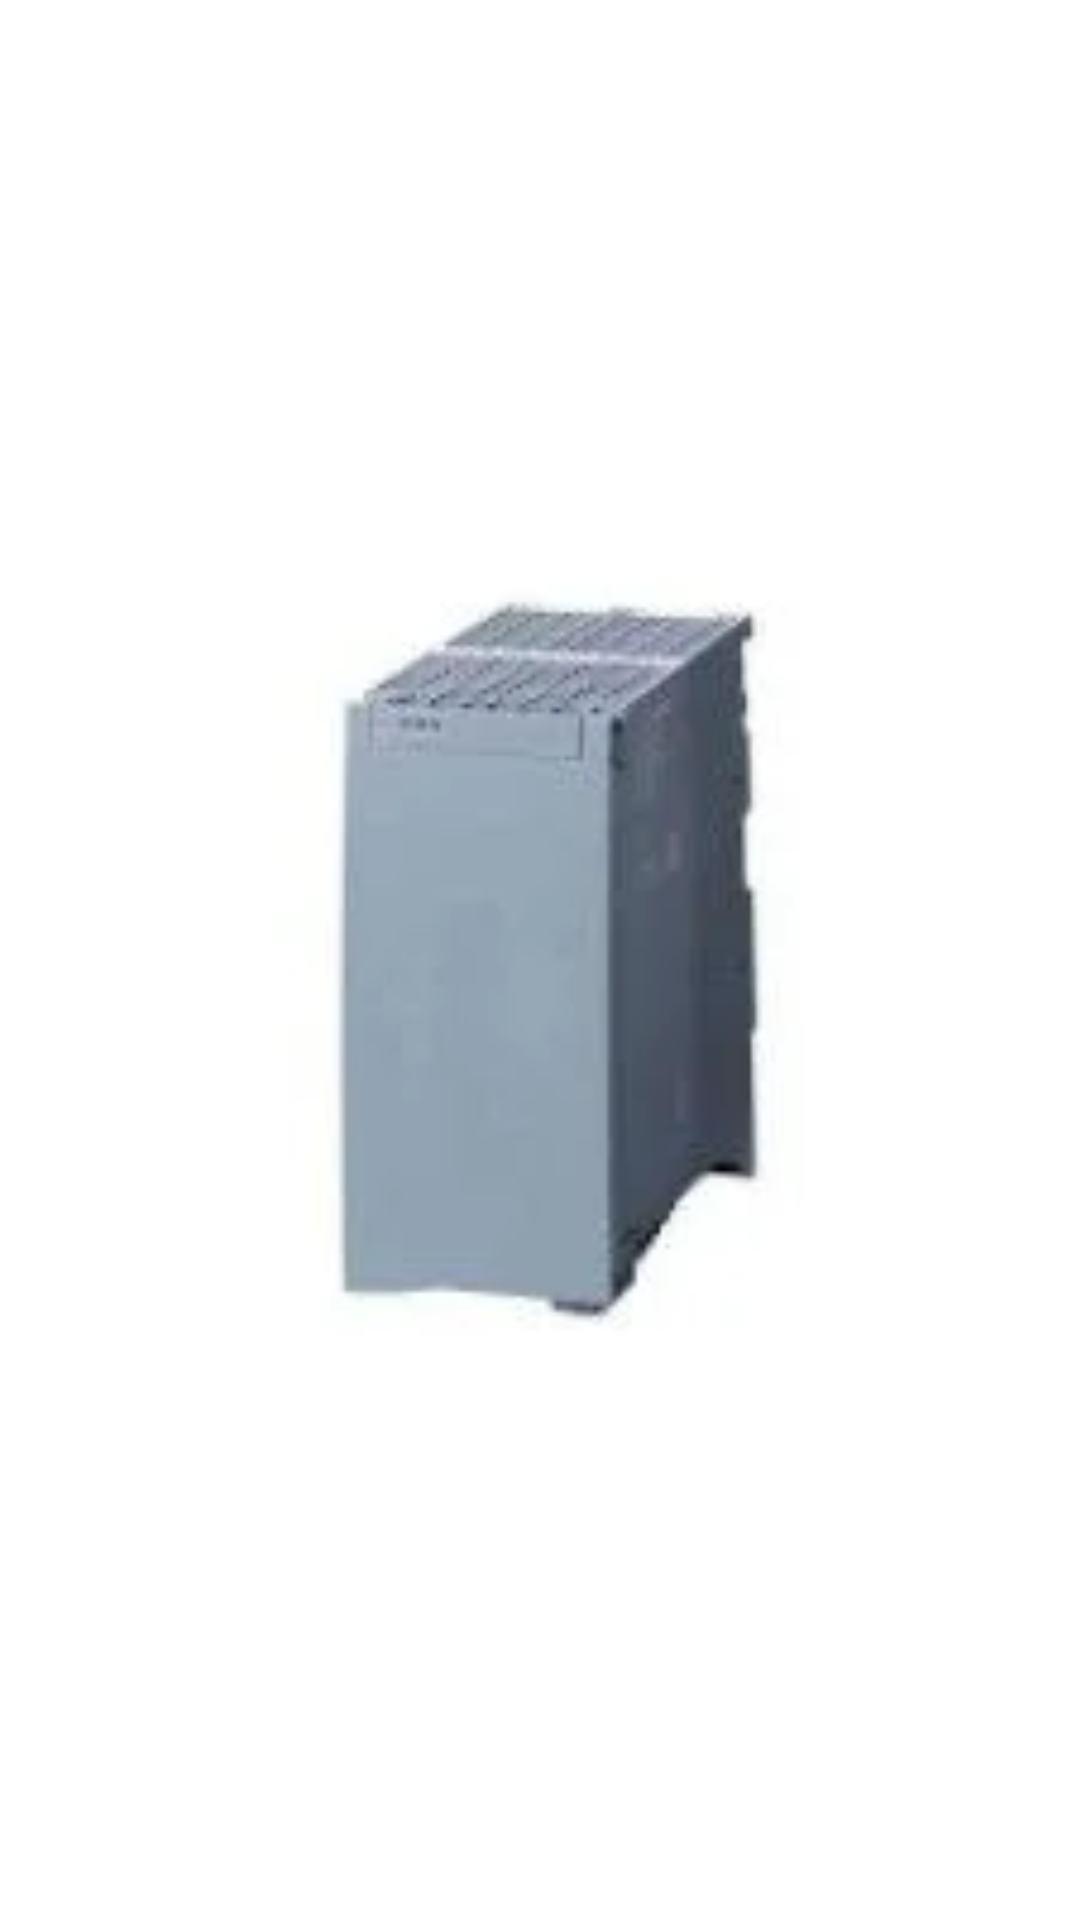 6ES7507-0RA00-0AB0 Siemens SIMATIC S7-1500, system power supply PS 60W 120/230V AC/DC, supplies the backplane bus of S7-1500 with operating voltage